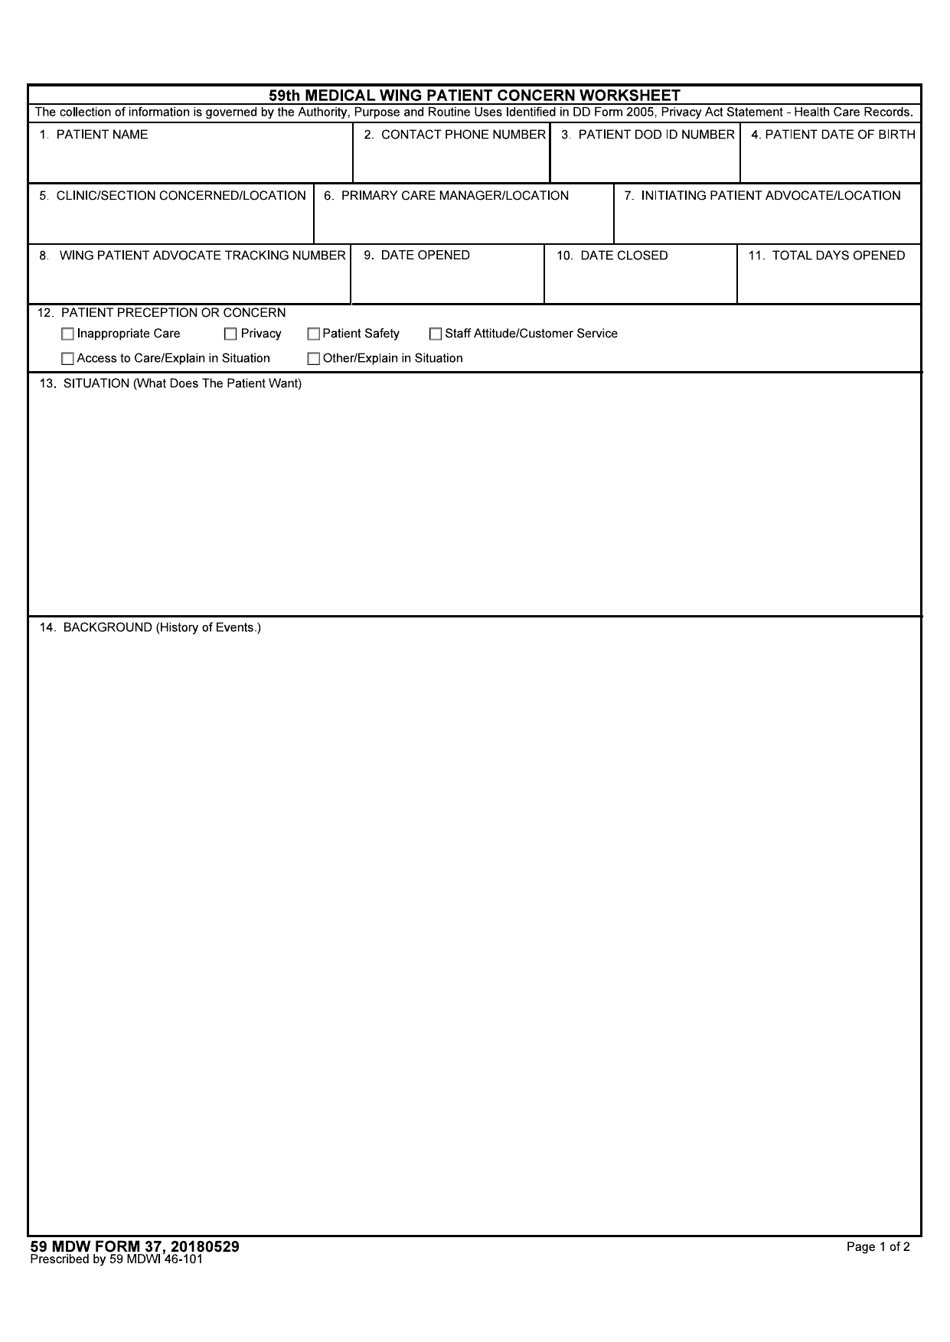 59 MDW Form 37 59th Medical Wing Patient Concern Worksheet, Page 1